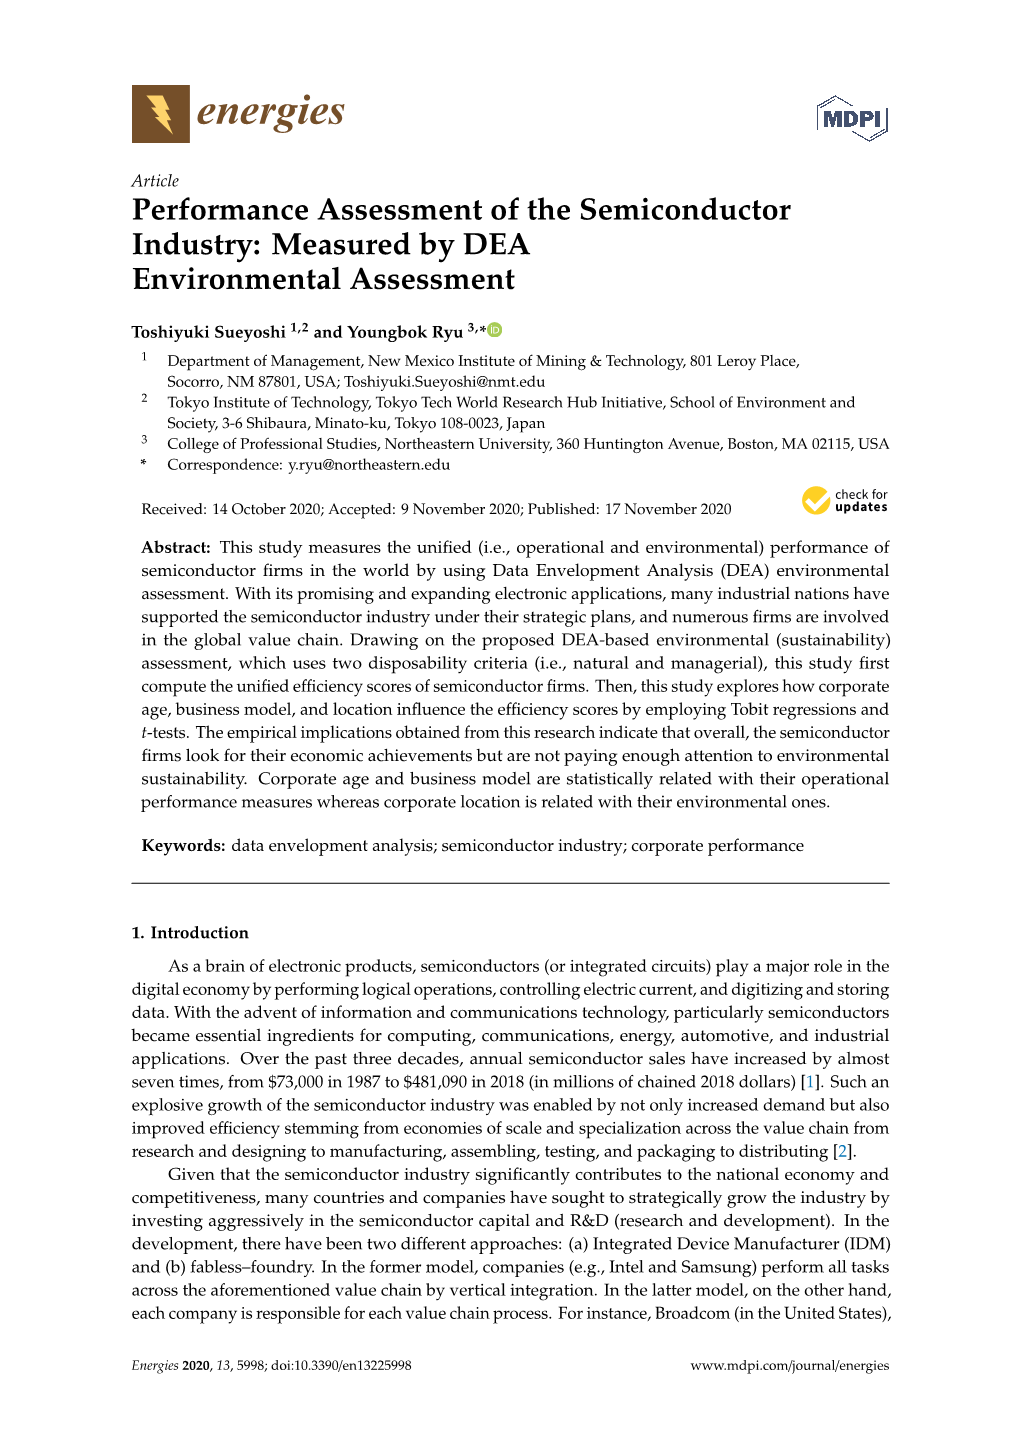 Performance Assessment of the Semiconductor Industry: Measured by DEA Environmental Assessment